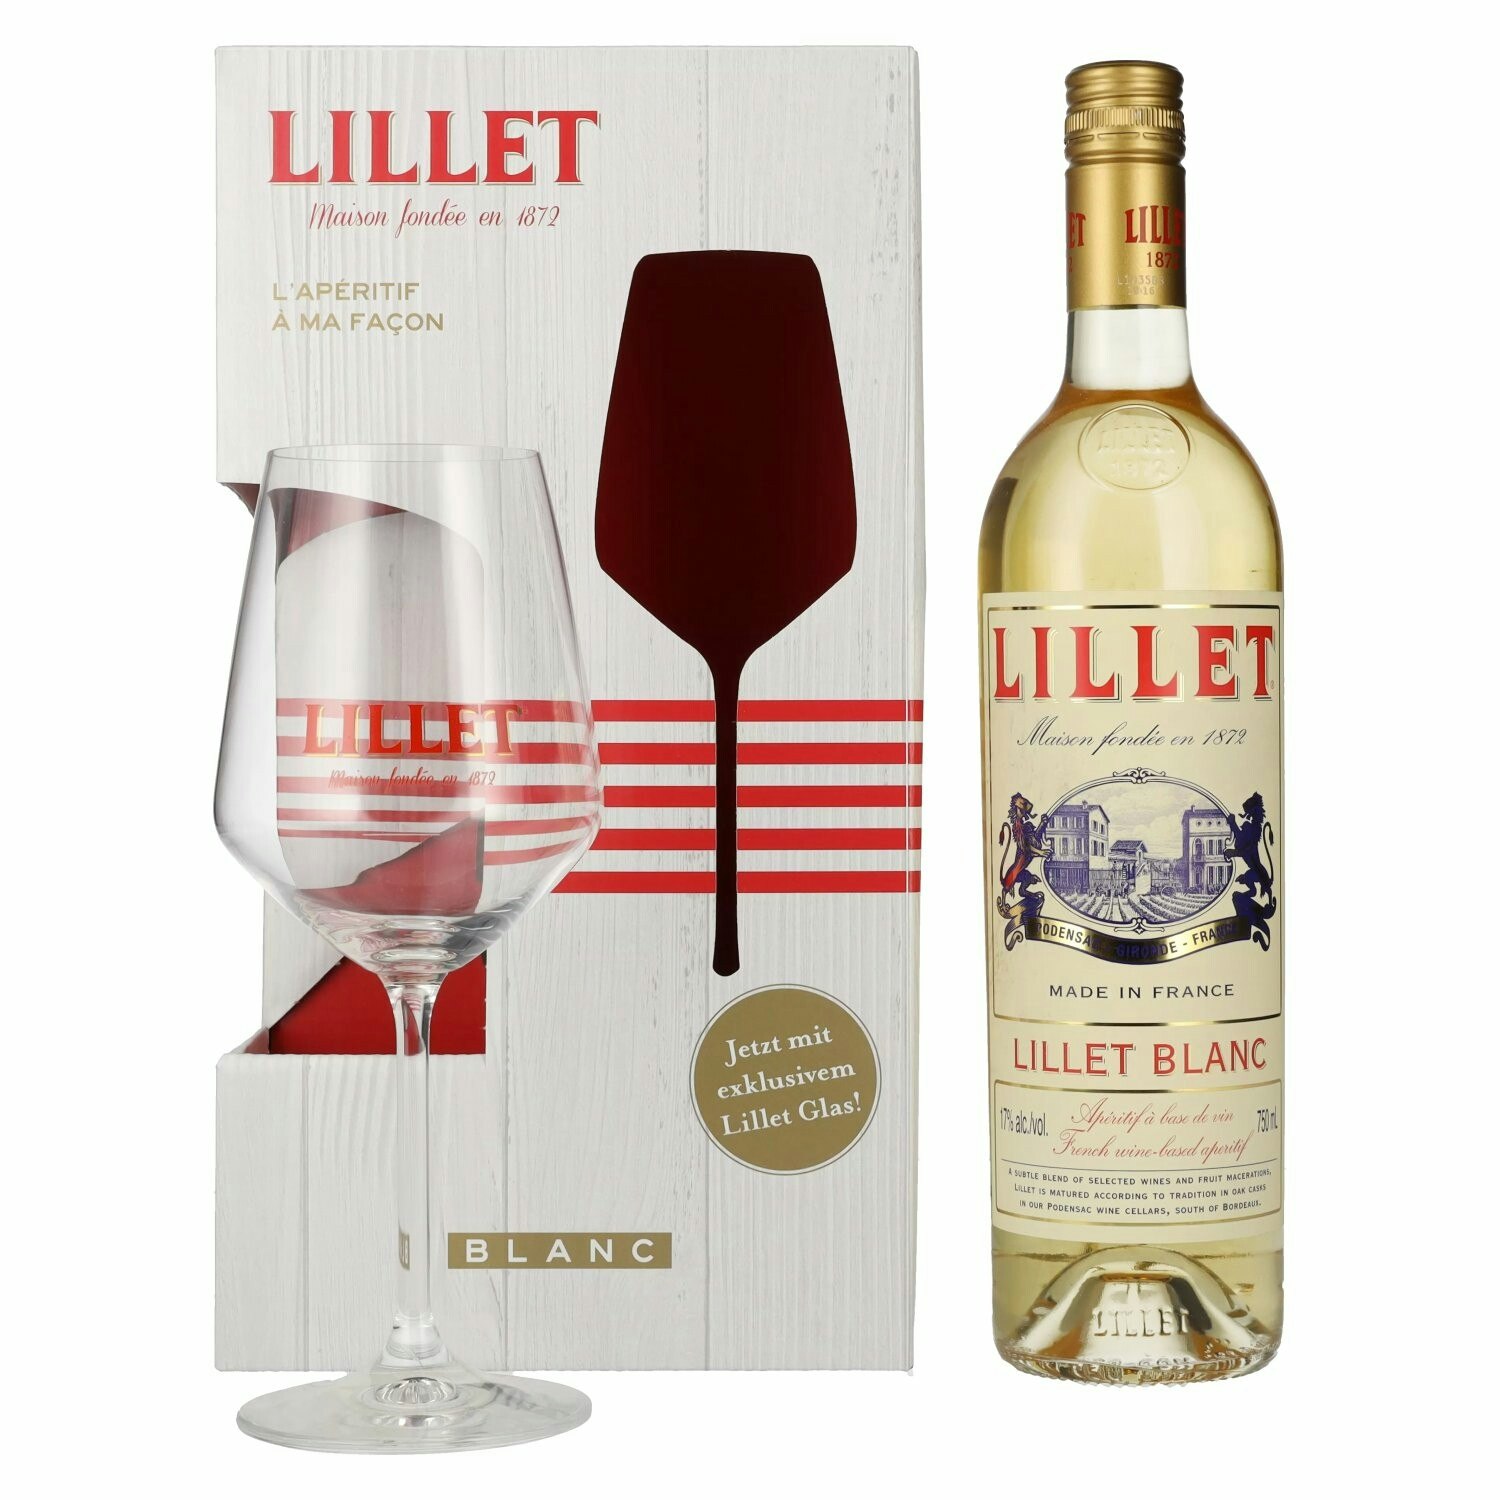 Lillet Blanc 17% Vol. 0,75l in Giftbox with glass